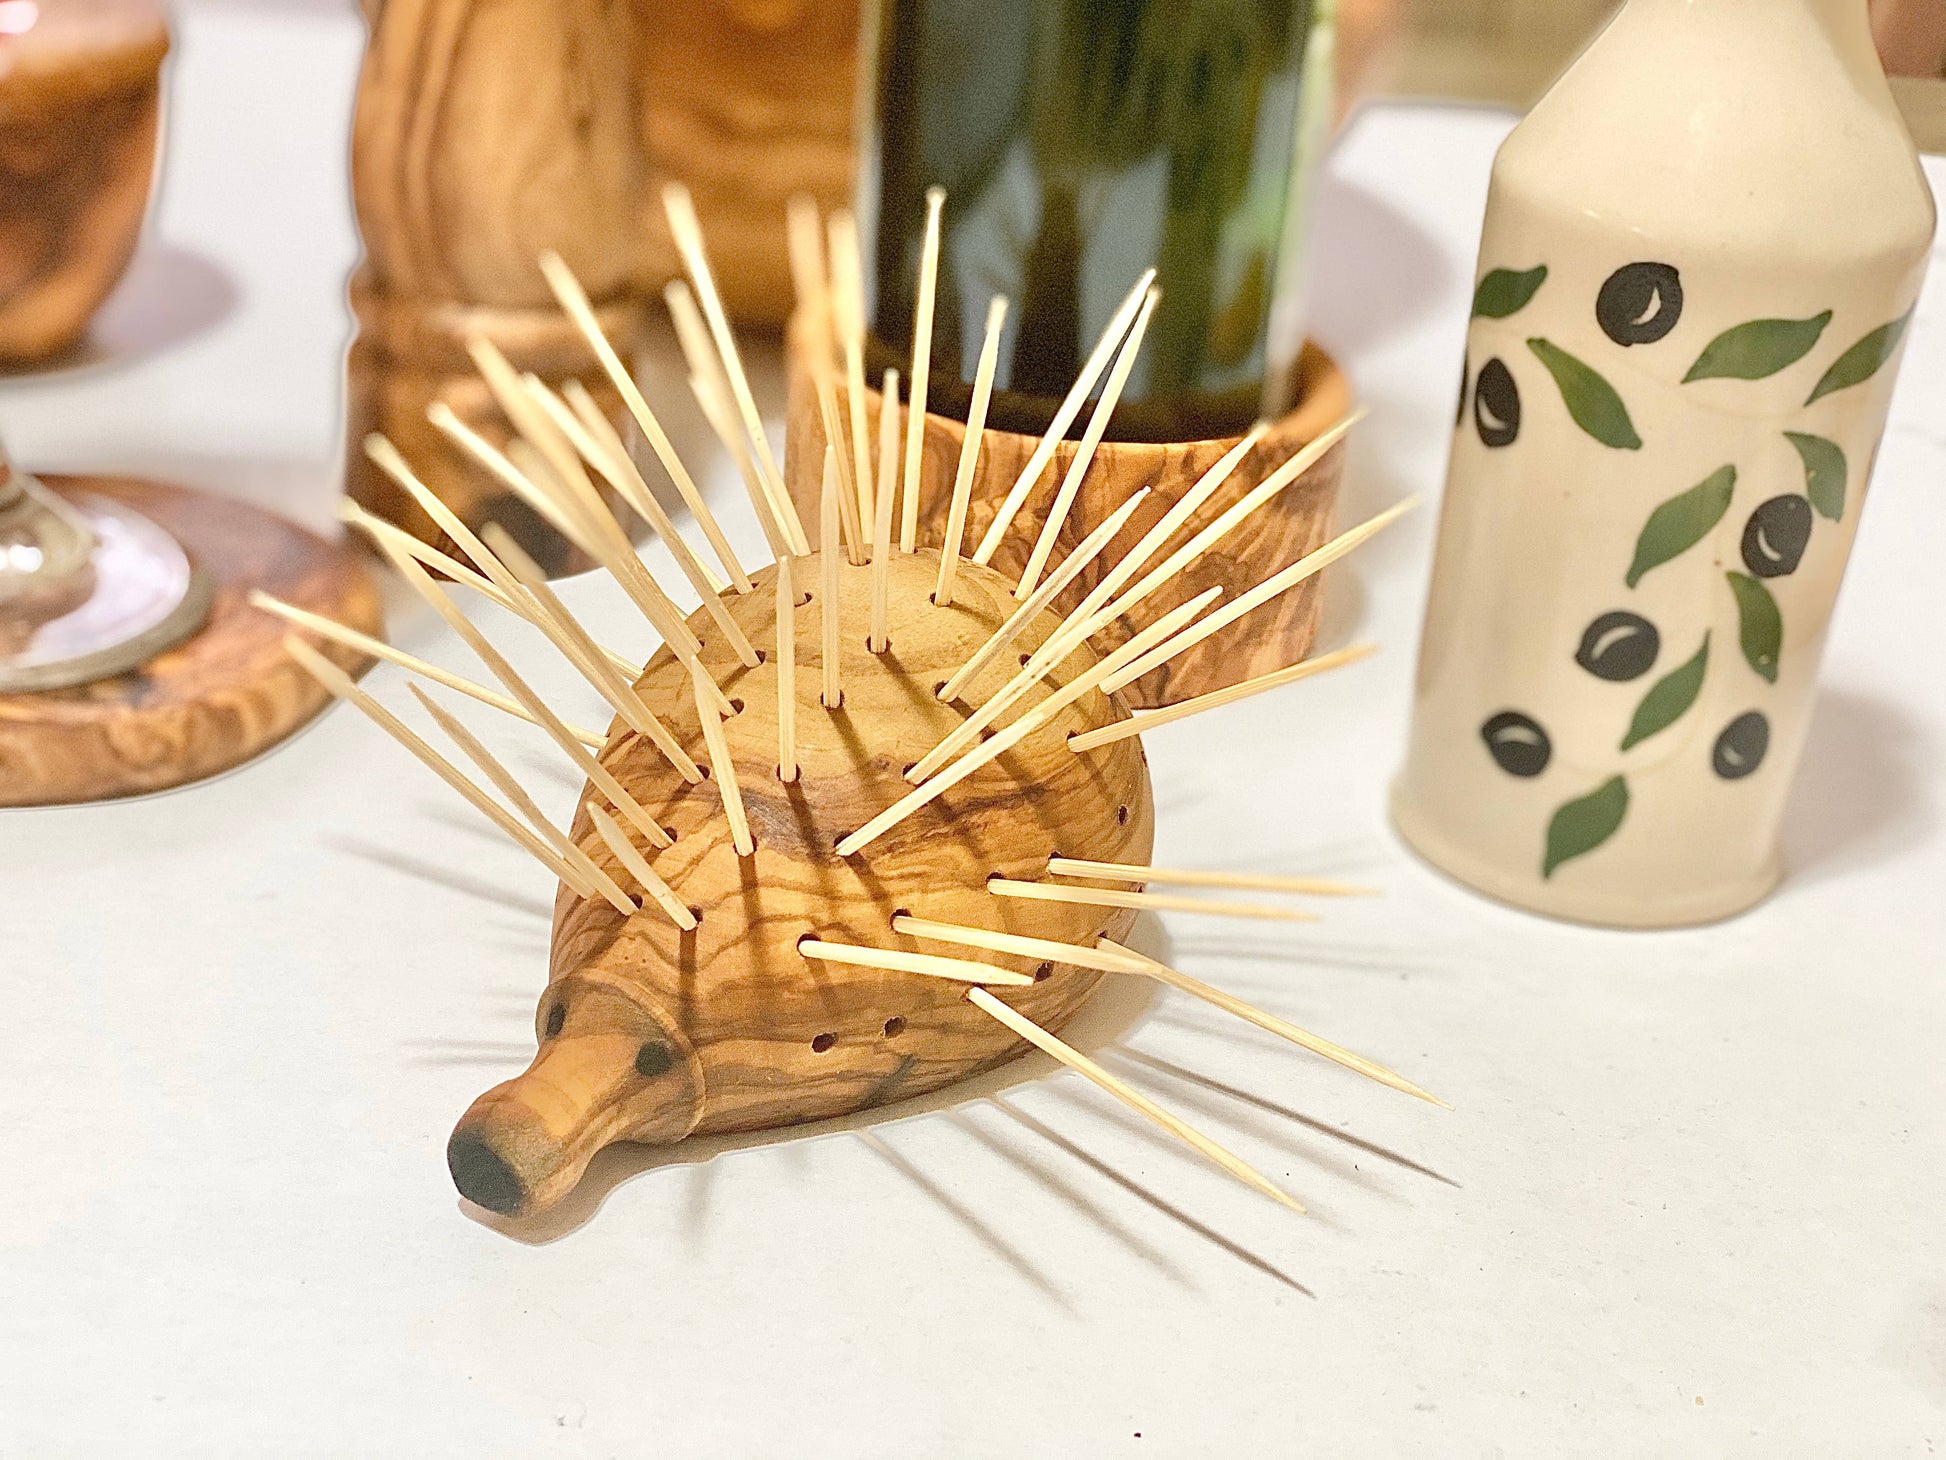 Olive wood hedgehog porcupine with holes to hold and display toothpicks